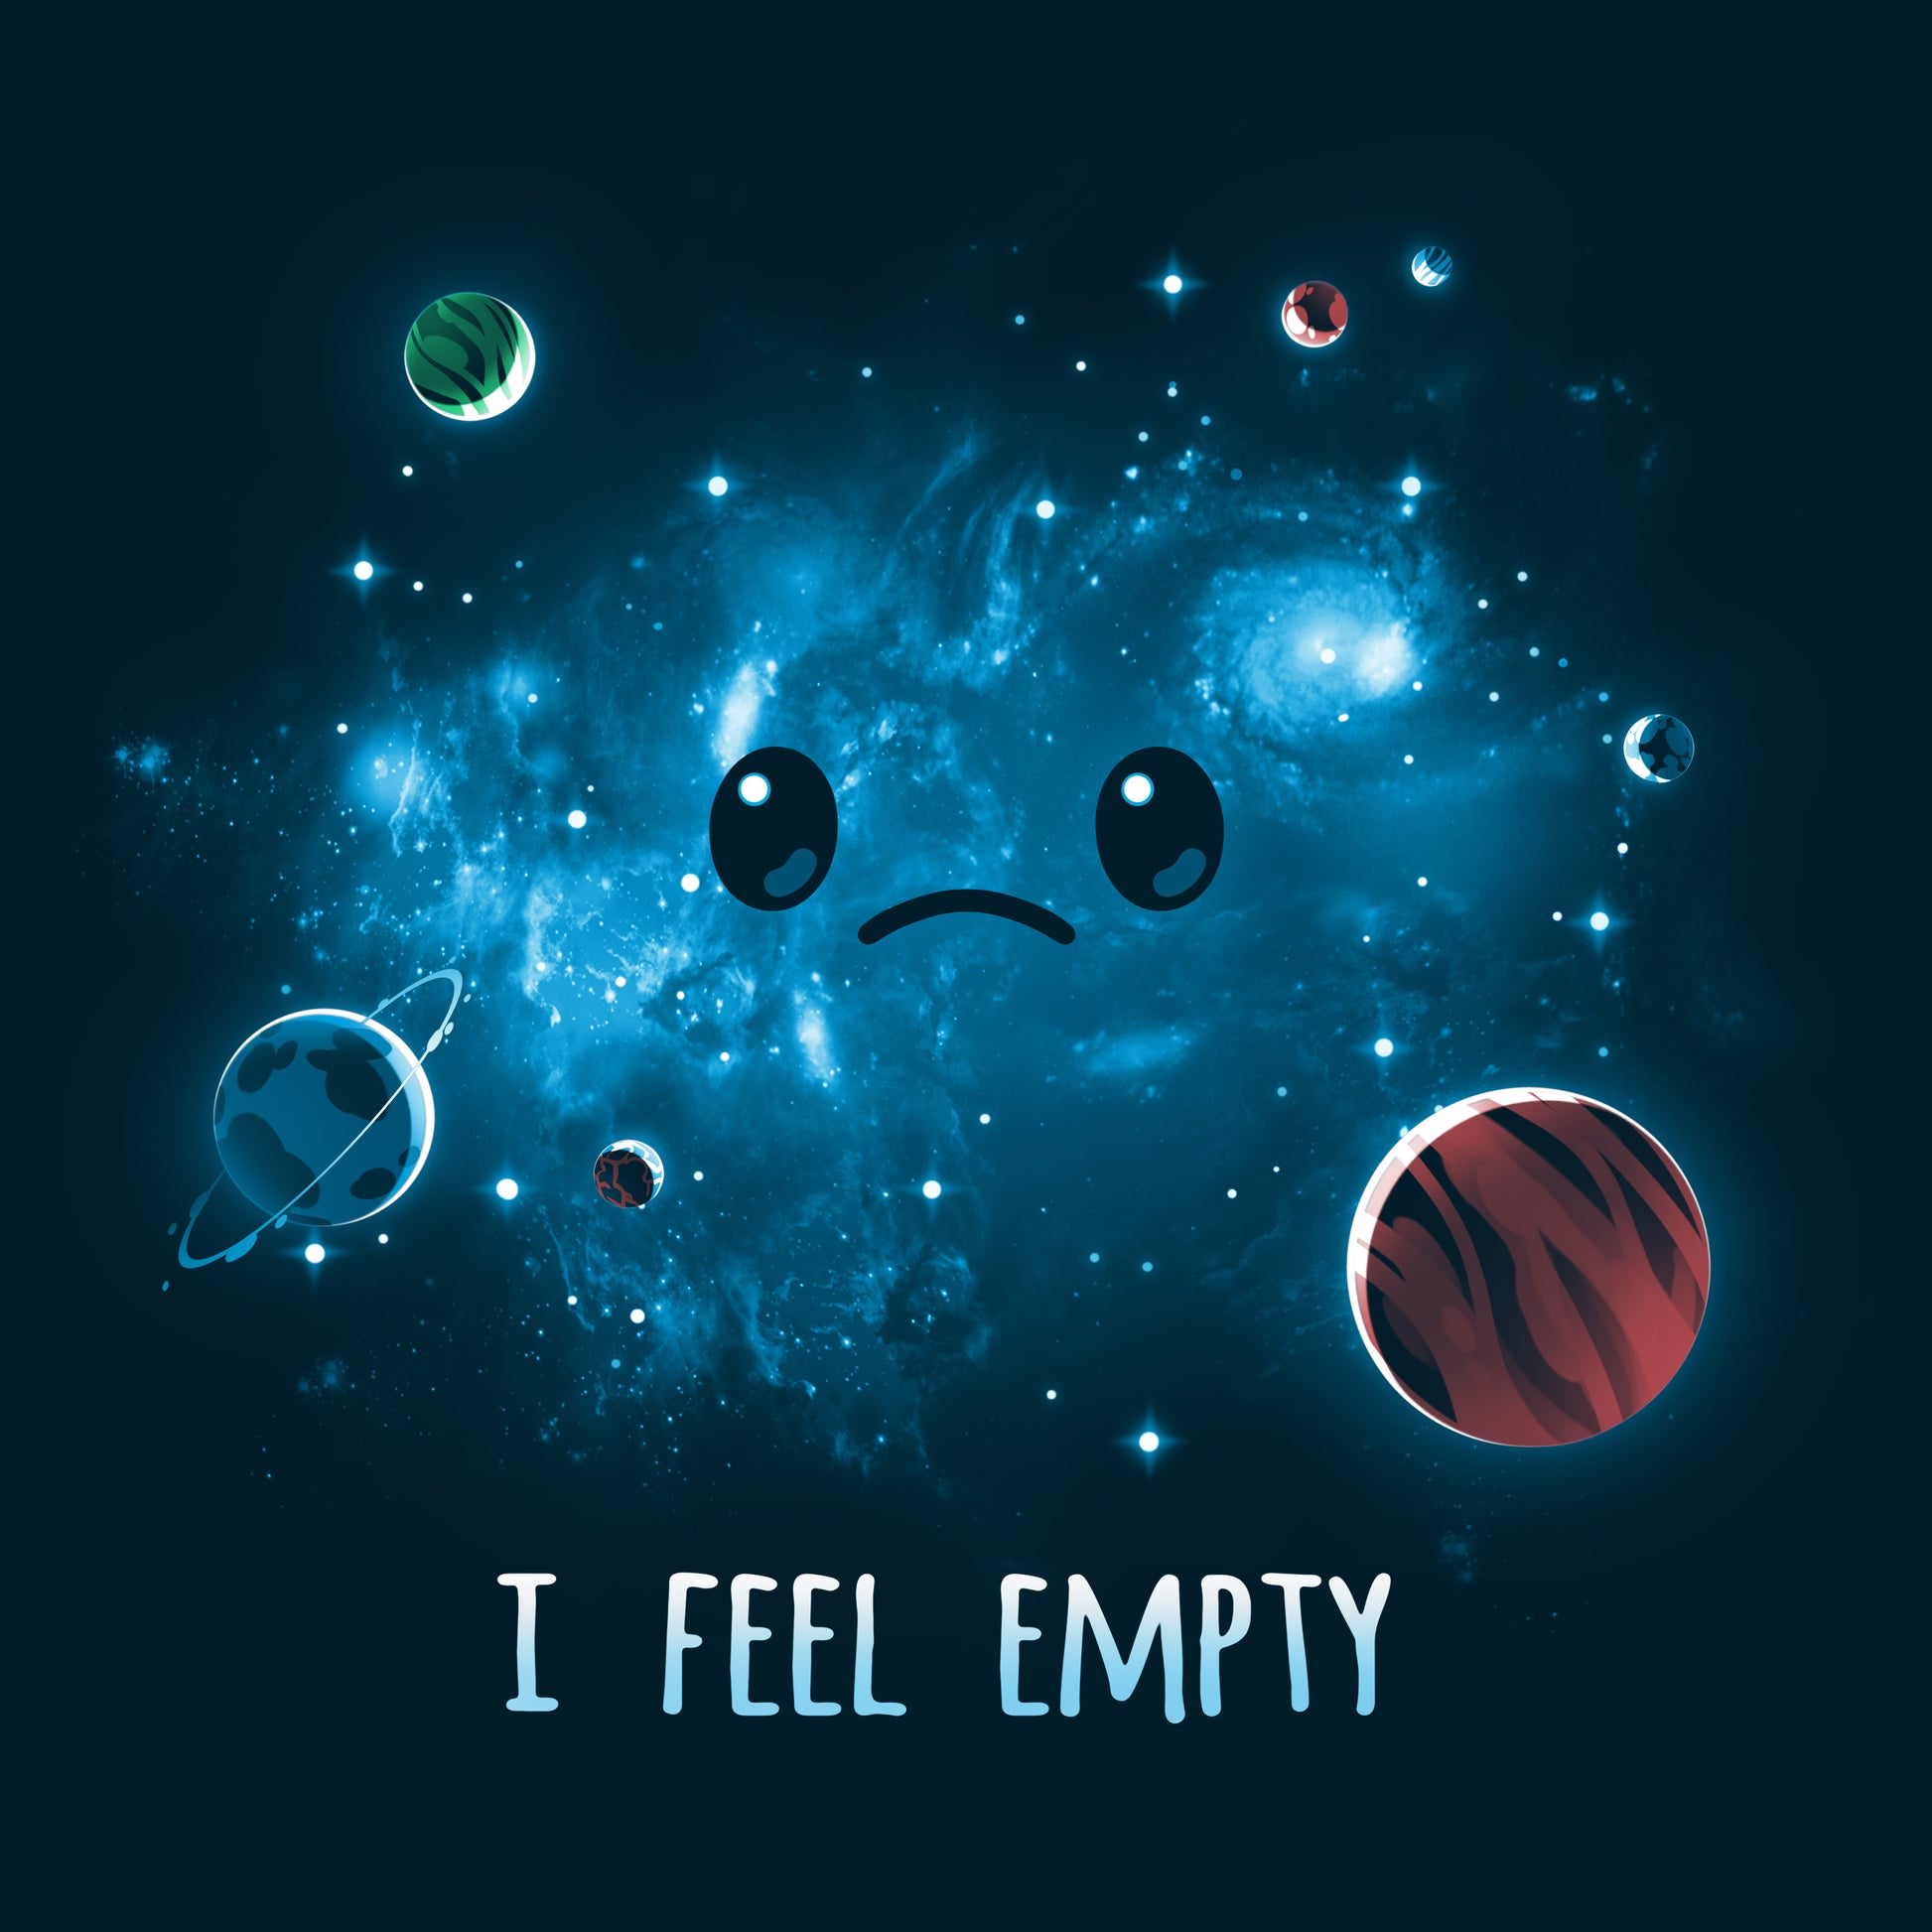 A space-themed "I Feel Empty" t-shirt by TeeTurtle that creatively portrays emptiness with the text "i feel empty" boldly printed on it.